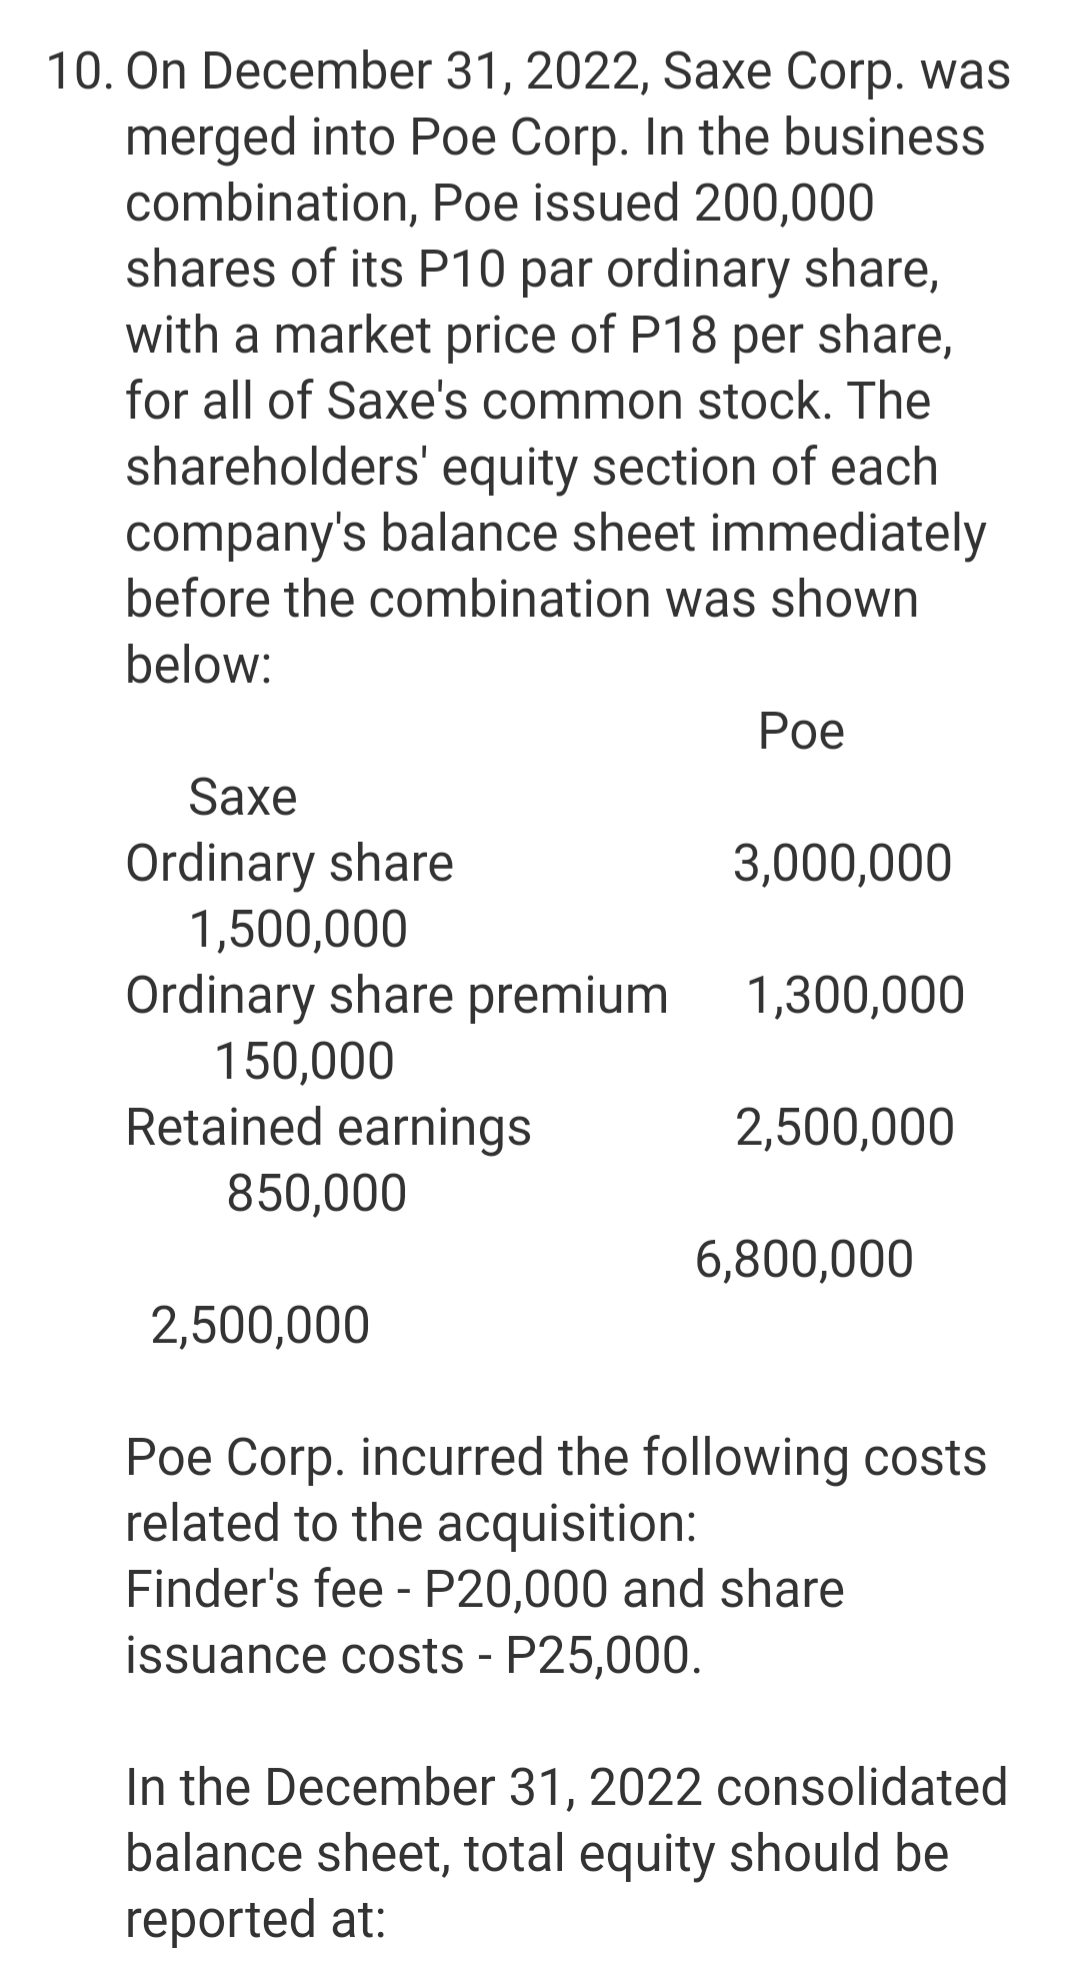 10. On December 31, 2022, Saxe Corp. was
merged into Poe Corp. In the business
combination, Poe issued 200,000
shares of its P10 par ordinary share,
with a market price of P18 per share,
for all of Saxe's common stock. The
shareholders' equity section of each
company's balance sheet immediately
before the combination was shown
below:
Рое
Saxe
Ordinary share
1,500,000
3,000,000
Ordinary share premium
150,000
Retained earnings
1,300,000
2,500,000
850,000
6,800,000
2,500,000
Poe Corp. incurred the following costs
related to the acquisition:
Finder's fee - P20,000 and share
issuance costs - P25,000.
In the December 31, 2022 consolidated
balance sheet, total equity should be
reported at:
